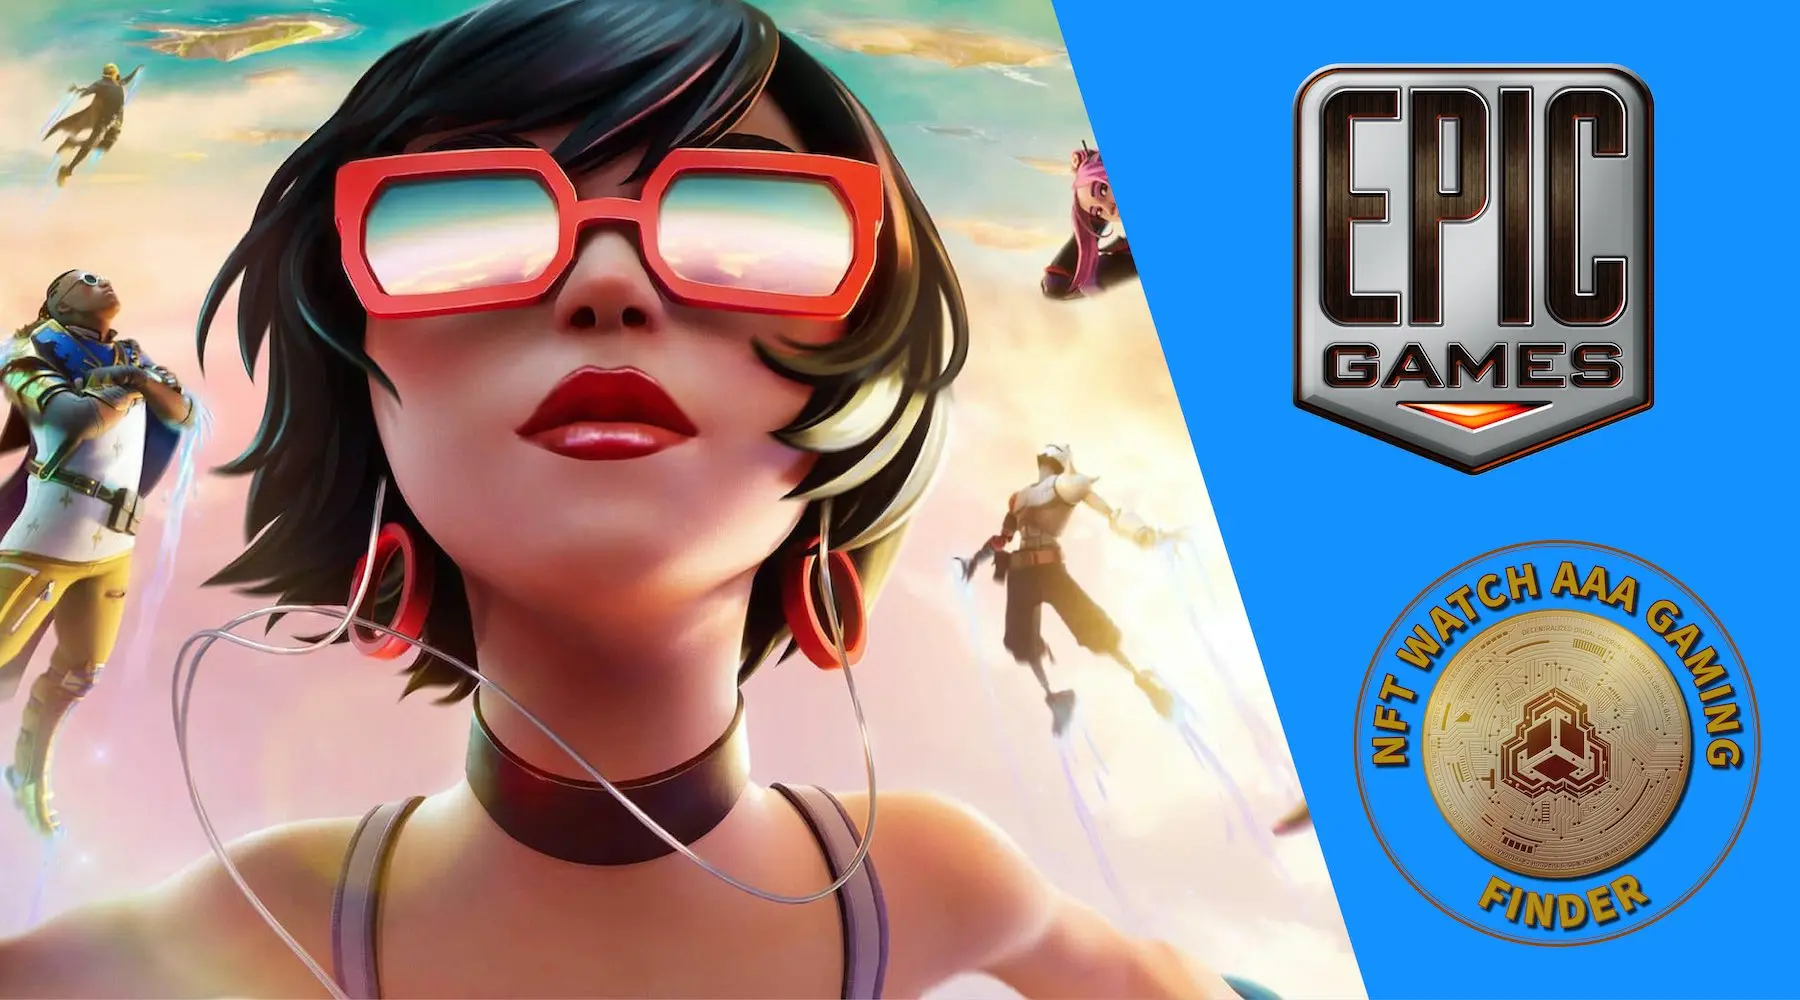 Bandcamp Joining Epic Games to Support Fair, Open Platforms for Artists and  Fans - Epic Games